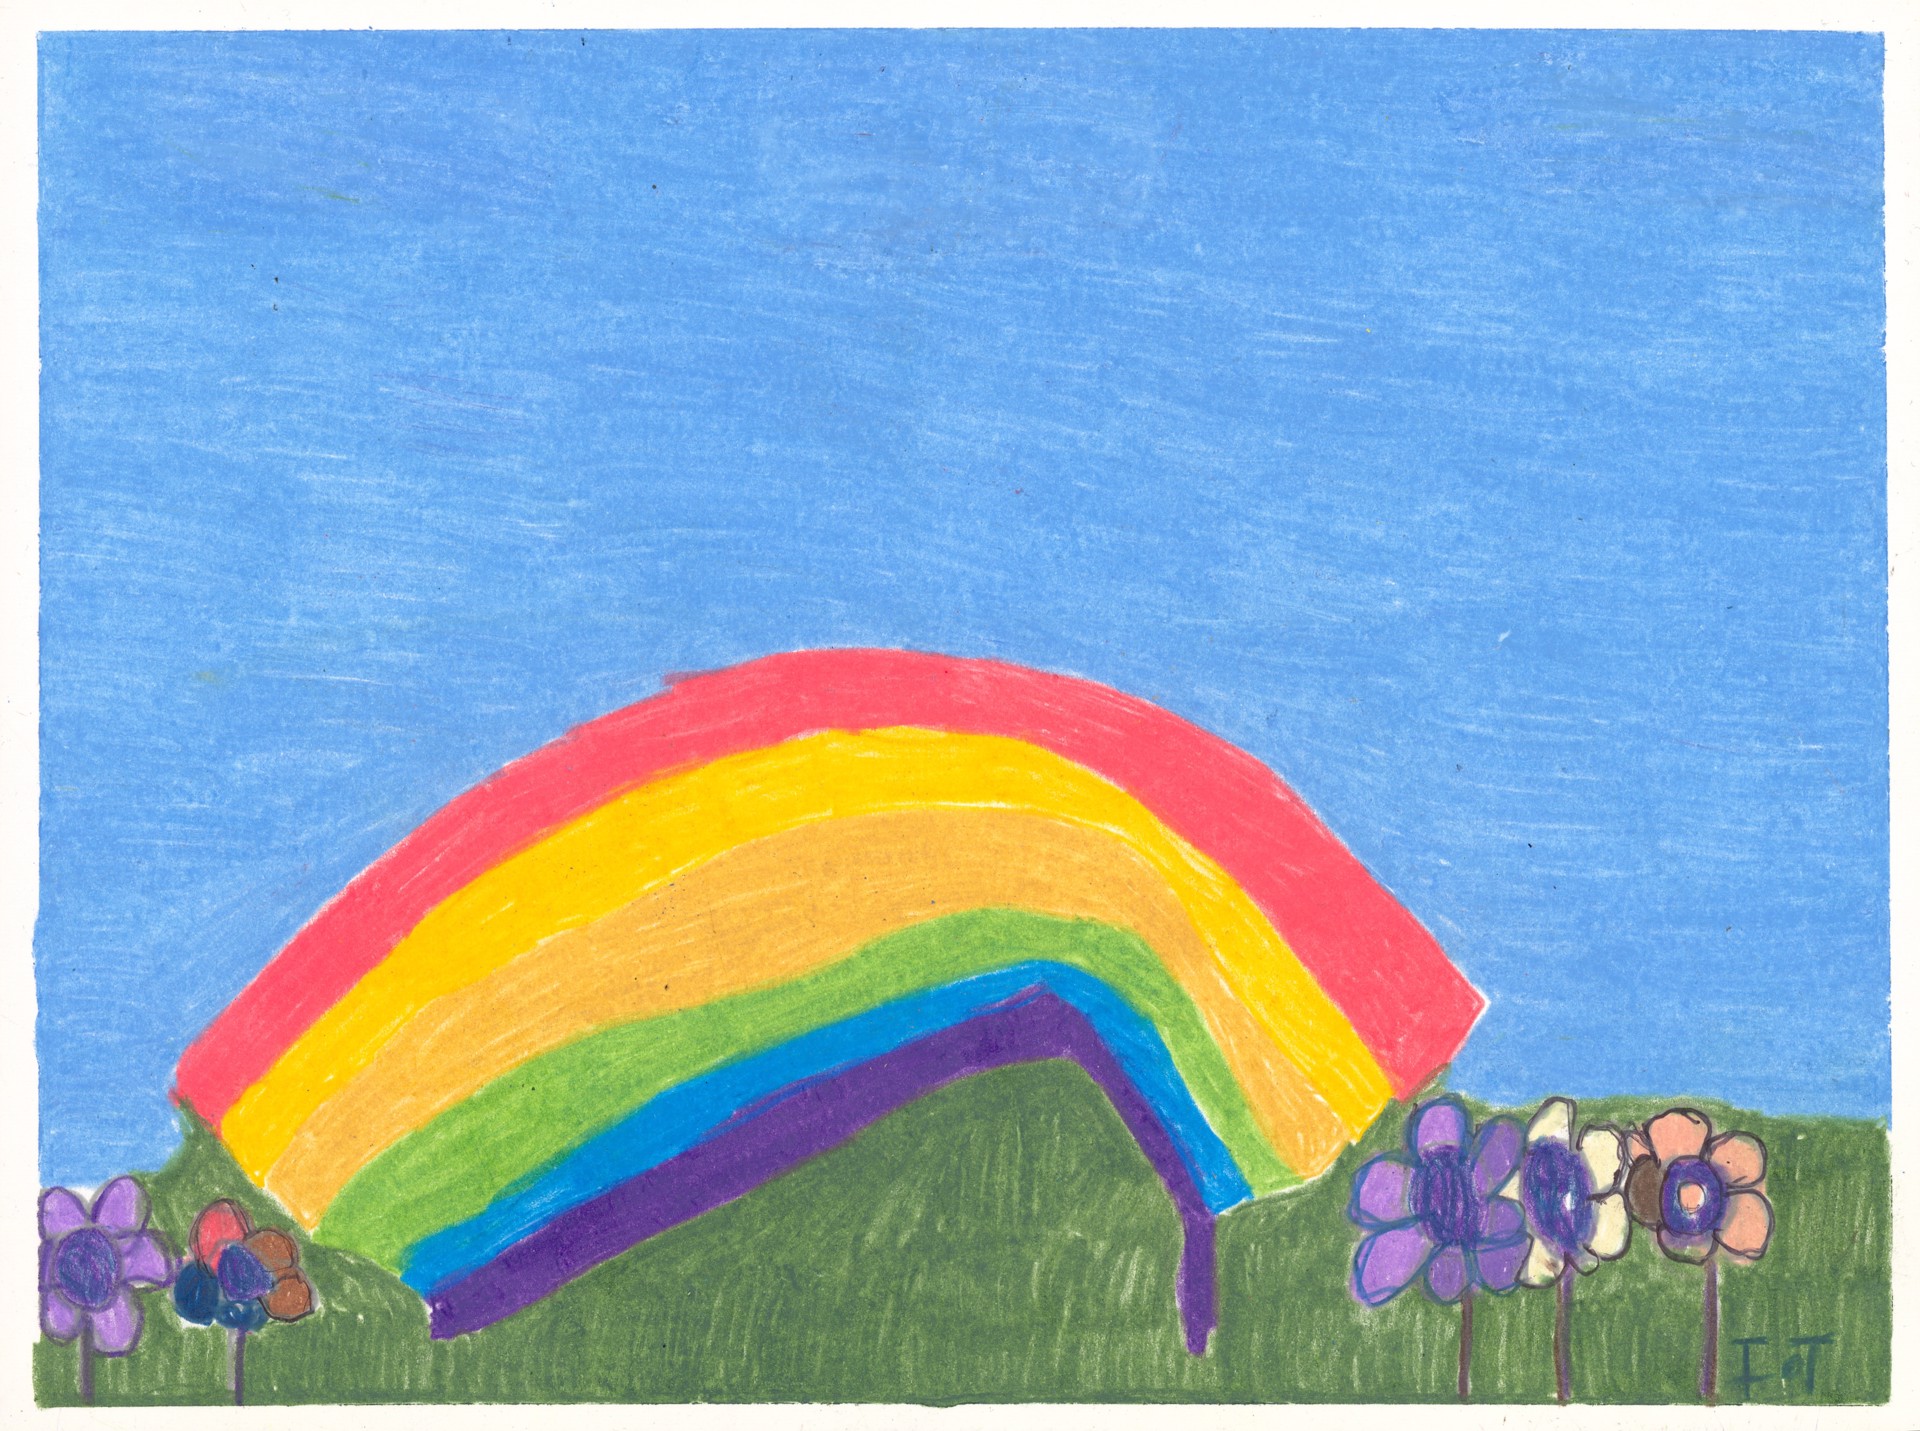 Rainbow and Flowers by Imani Turner